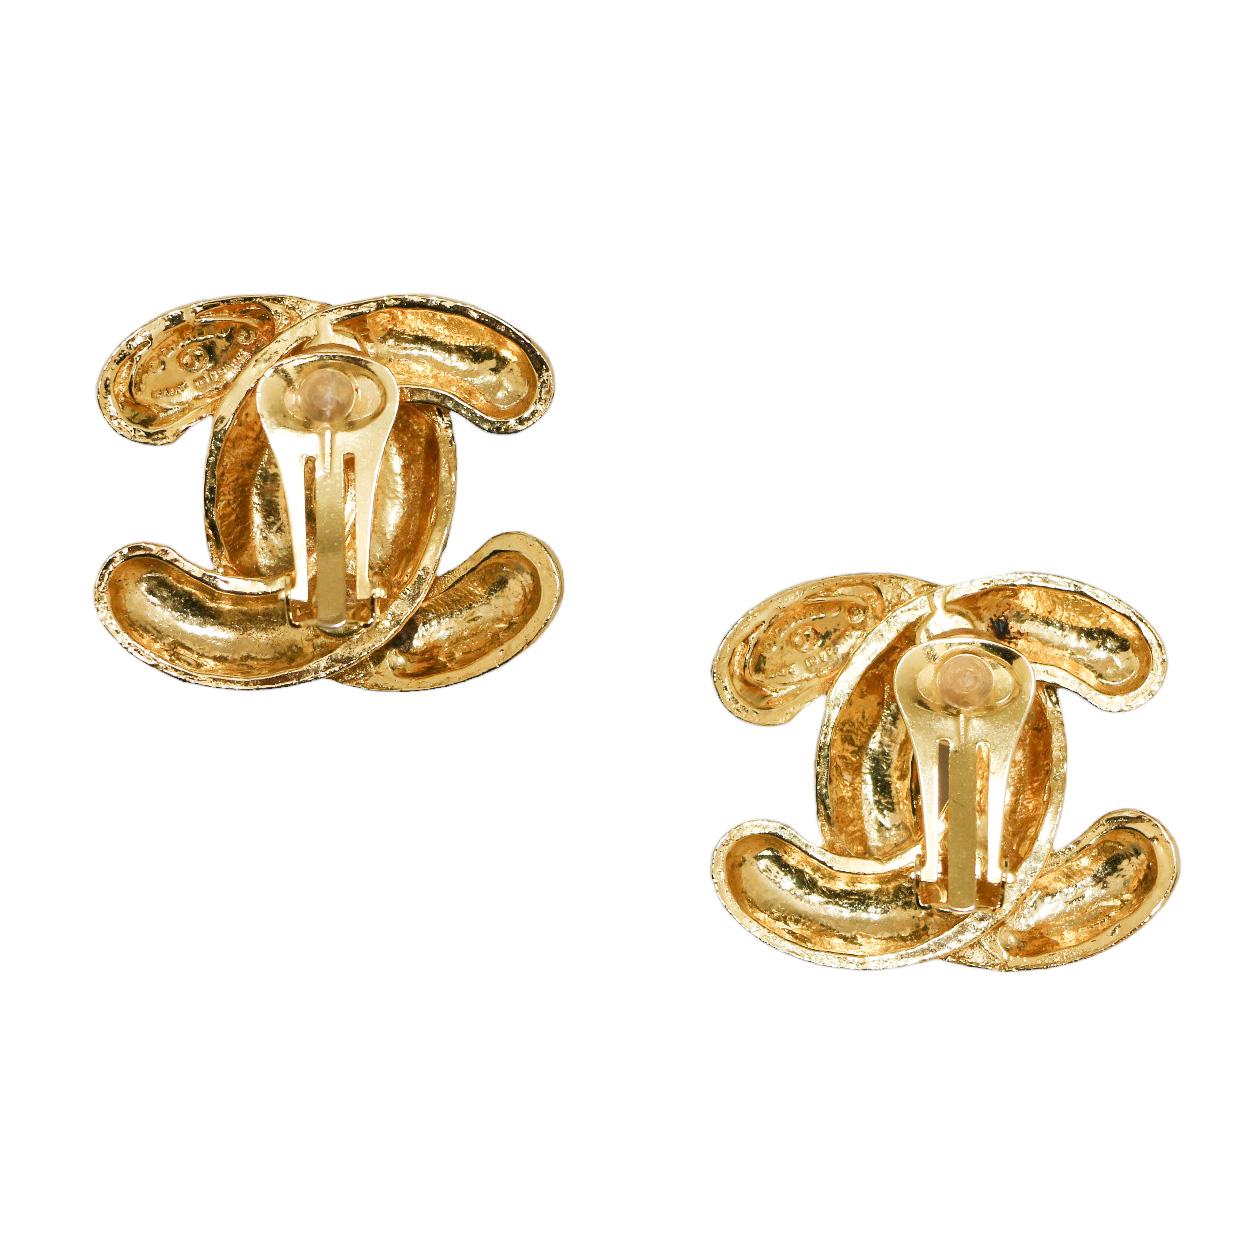 Beautiful vintage quilted clip-ons by Chanel
Condition : excellent
Made in France
Material : gold plated metal
Color : golden
Dimensions : 4.3 x 3 cm
Stamp : yes
Year : 1990-1992
Details : stunning quilted clip-on earrings reminding of the brand's